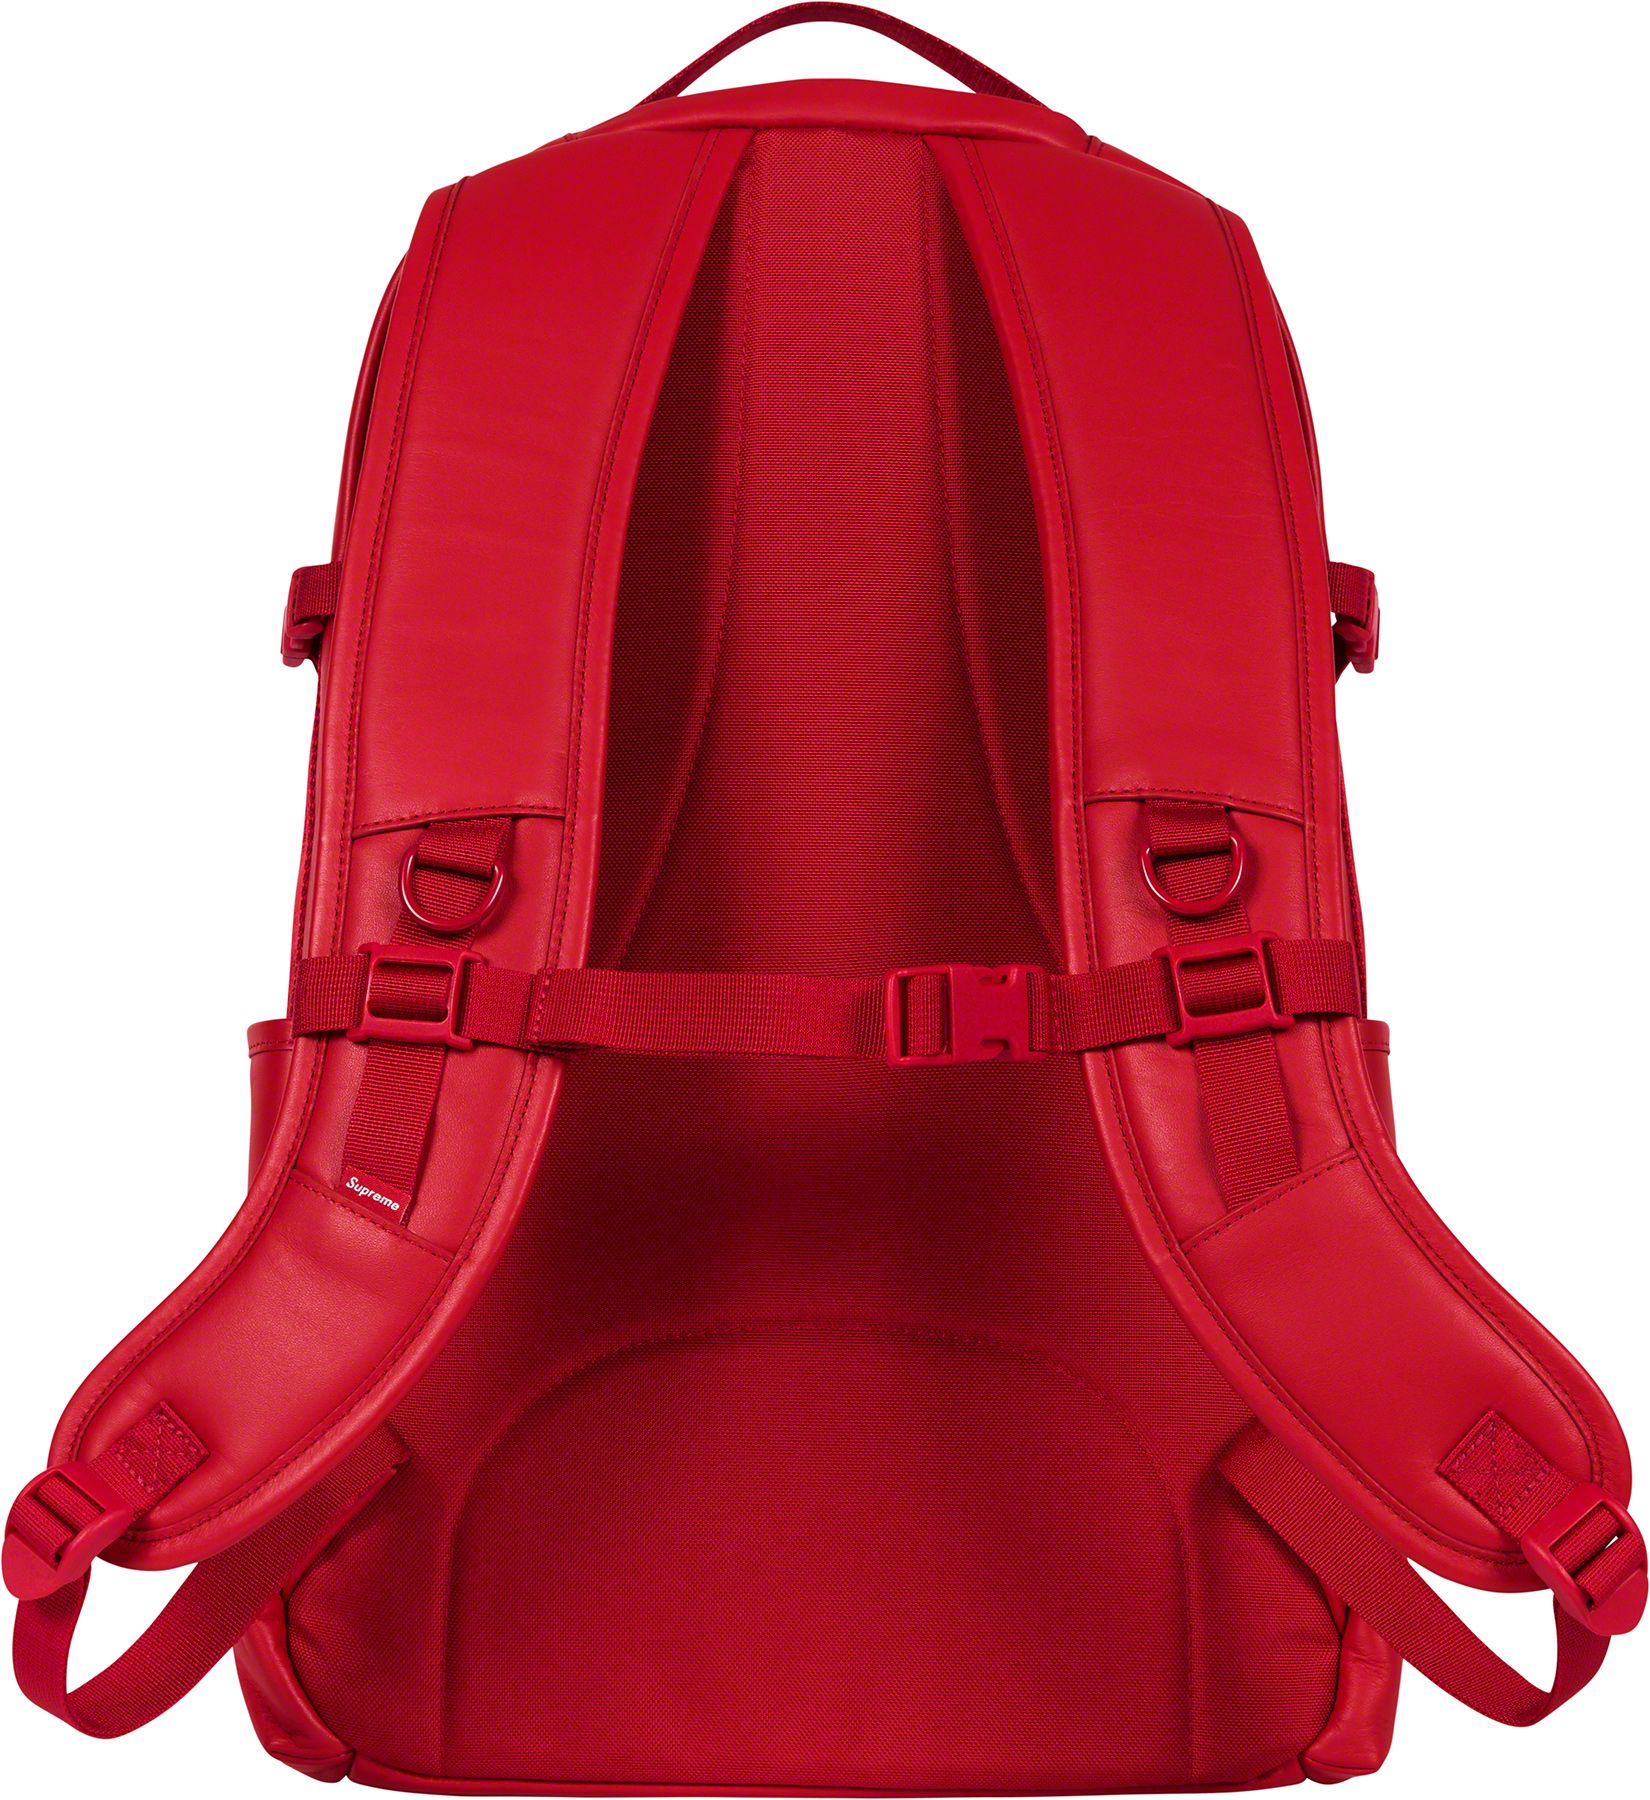 Backpack - Fall/Winter 2023 Preview – Supreme